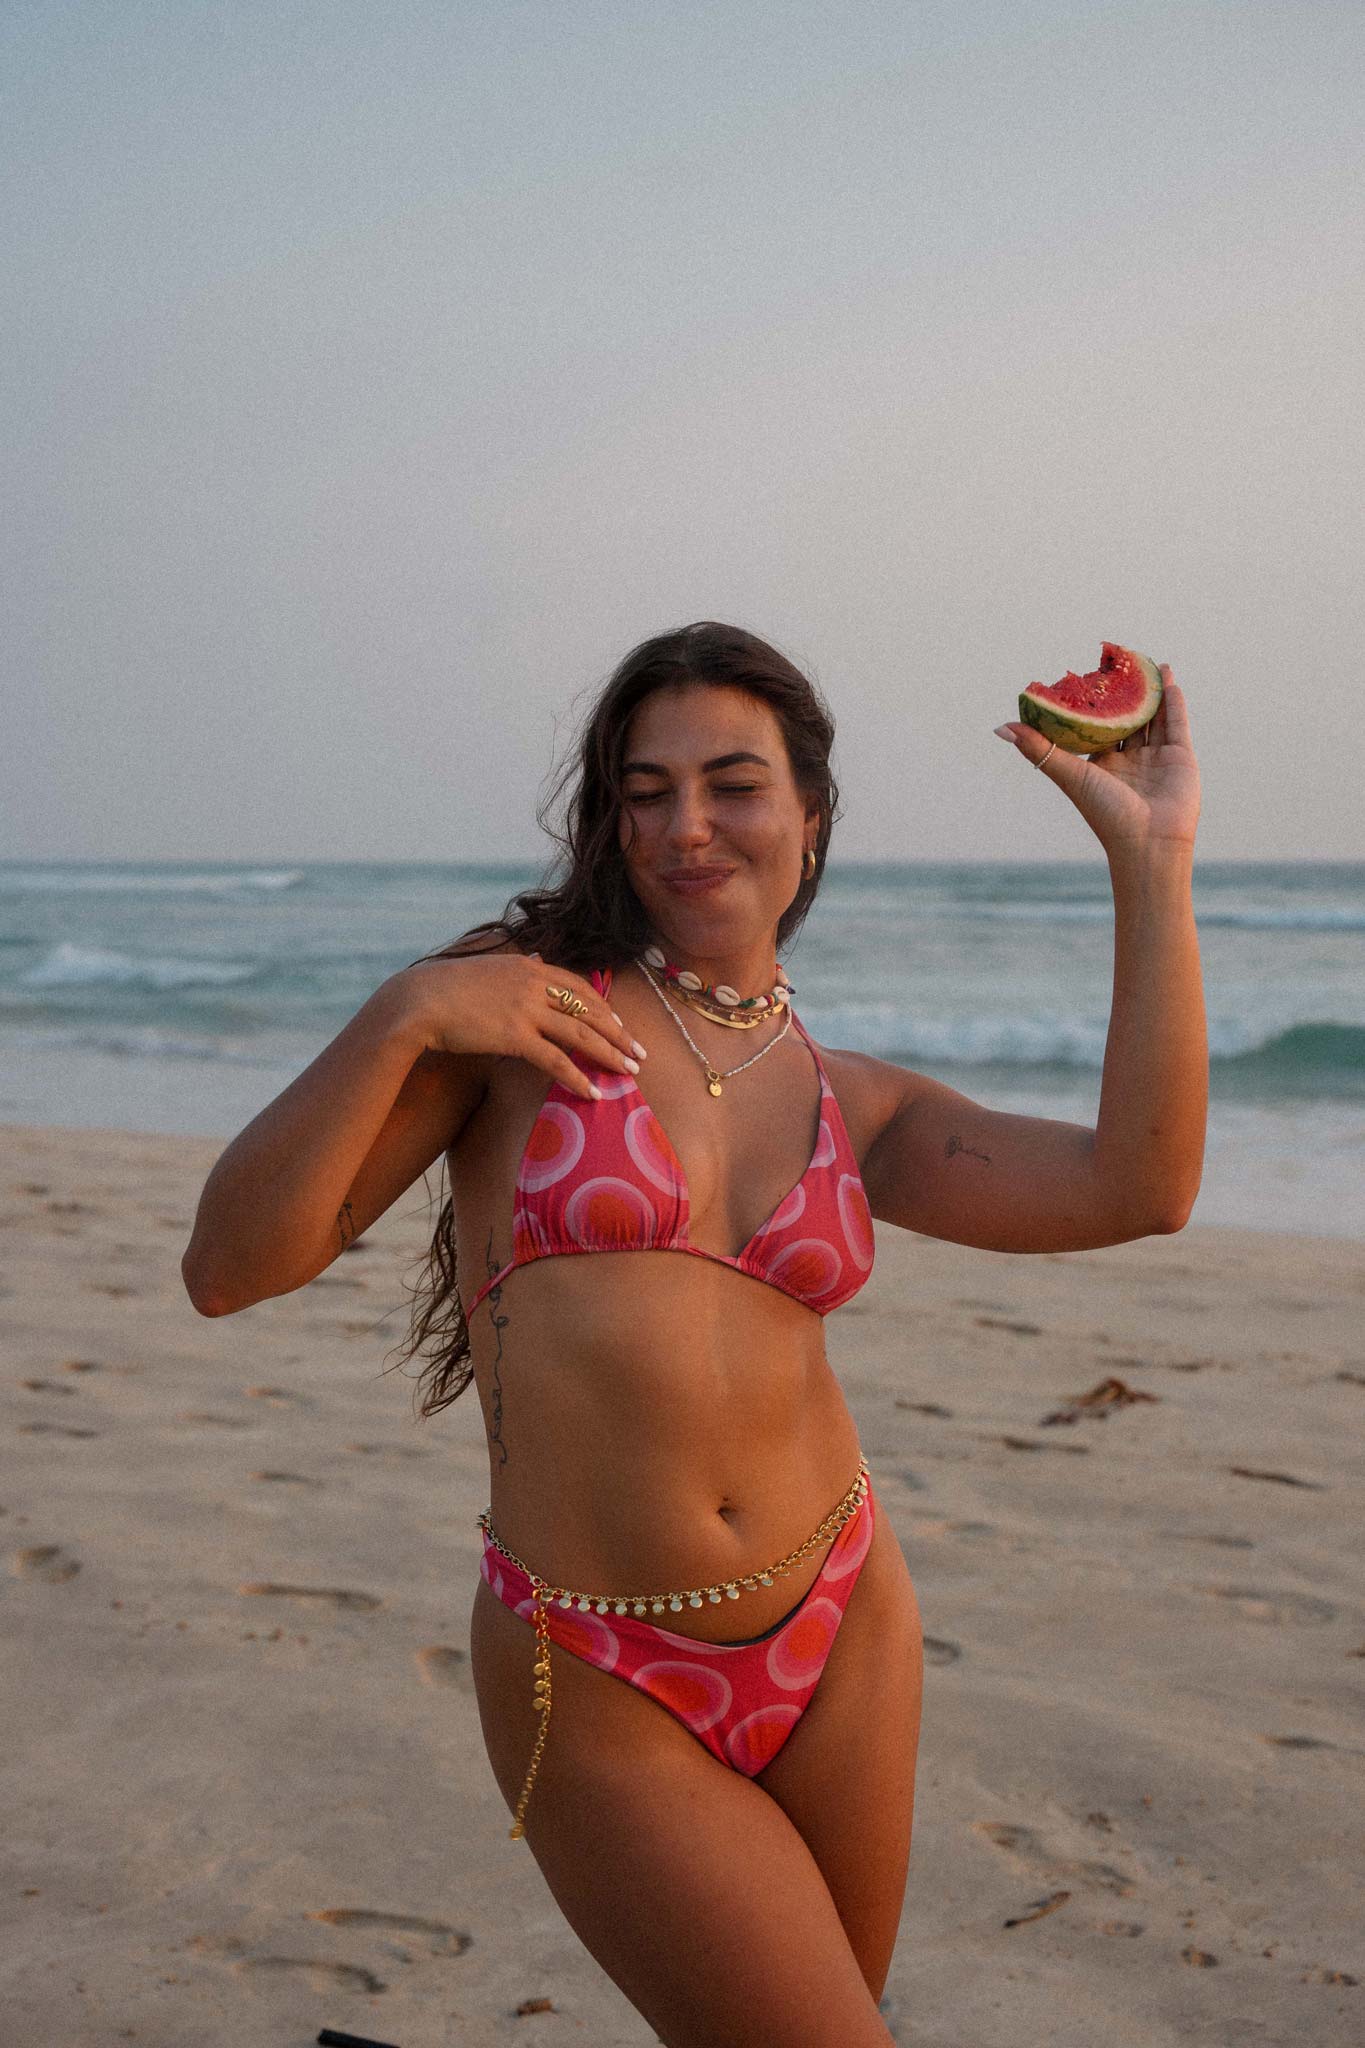 model posing at the beach with a watermelon in her hand